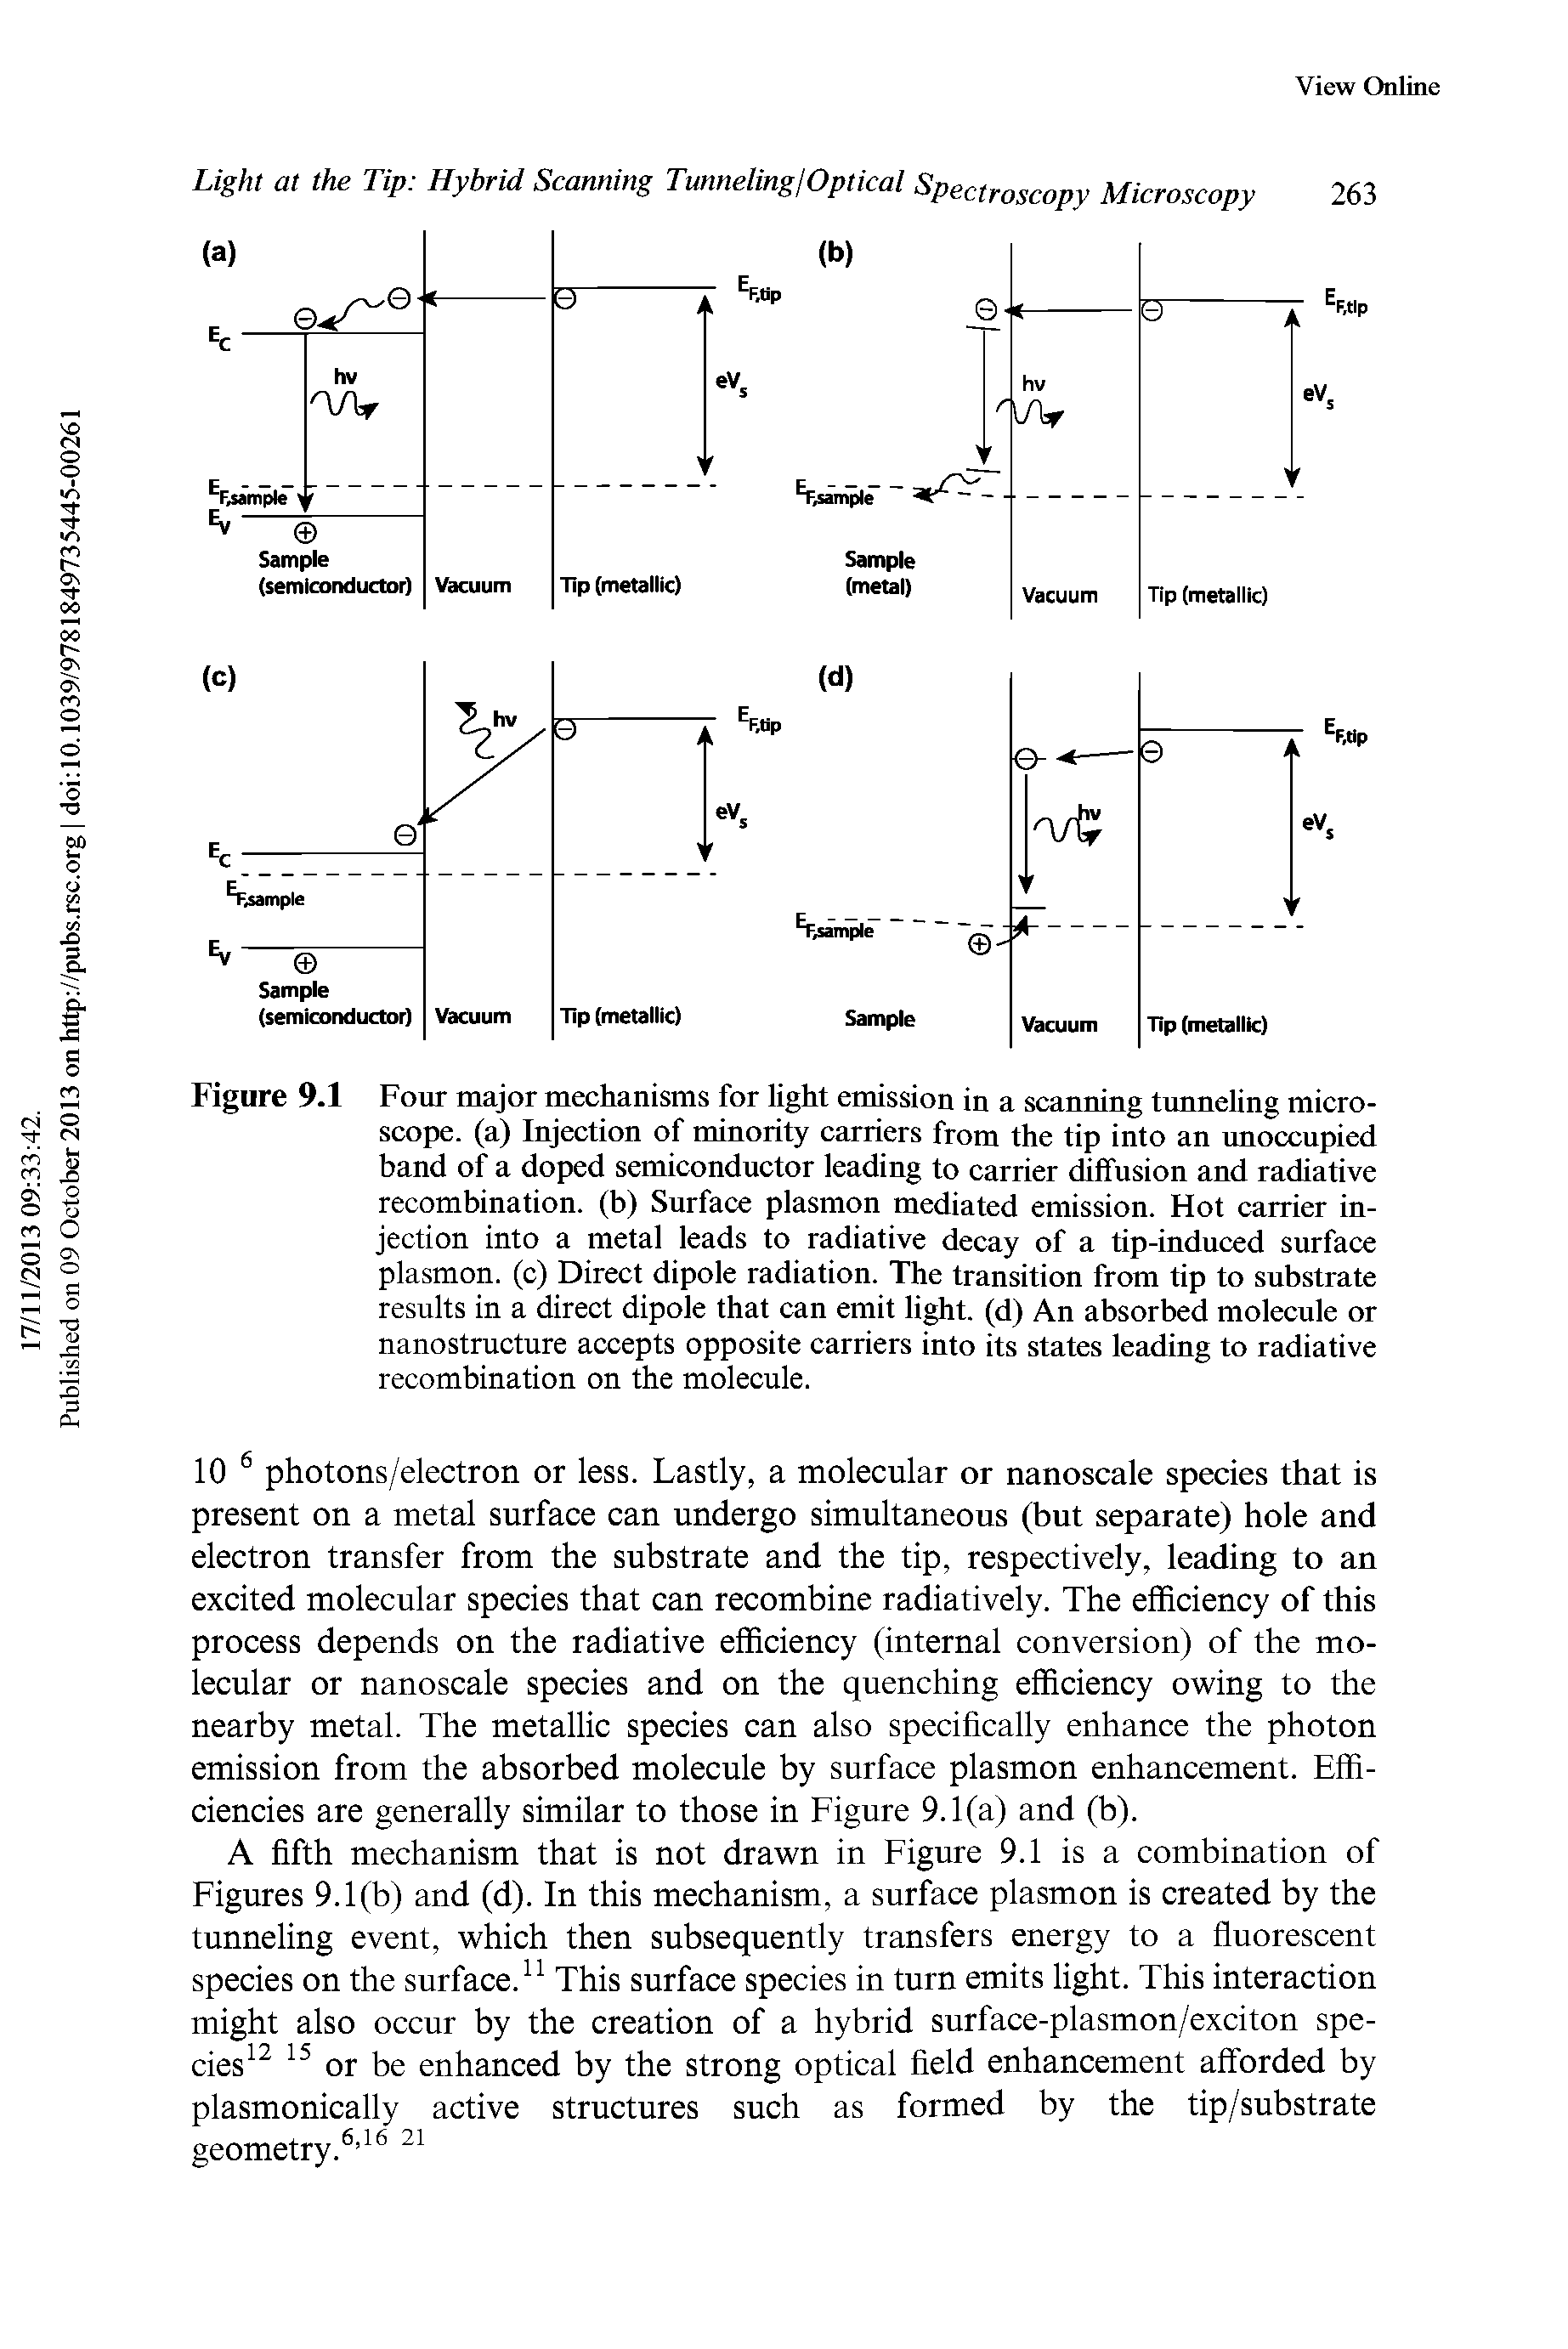 Figure 9.1 Four major mechanisms for light emission in a scanning tunneling microscope. (a) Injection of minority carriers from the tip into an unoccupied band of a doped semiconductor leading to carrier diffusion and radiative recombination, (b) Surface plasmon mediated emission. Hot carrier injection into a metal leads to radiative decay of a tip-induced surface plasmon. (c) Direct dipole radiation. The transition from tip to substrate results in a direct dipole that can emit light, (d) An absorbed molecule or nanostructure accepts opposite carriers into its states leading to radiative recombination on the molecule.